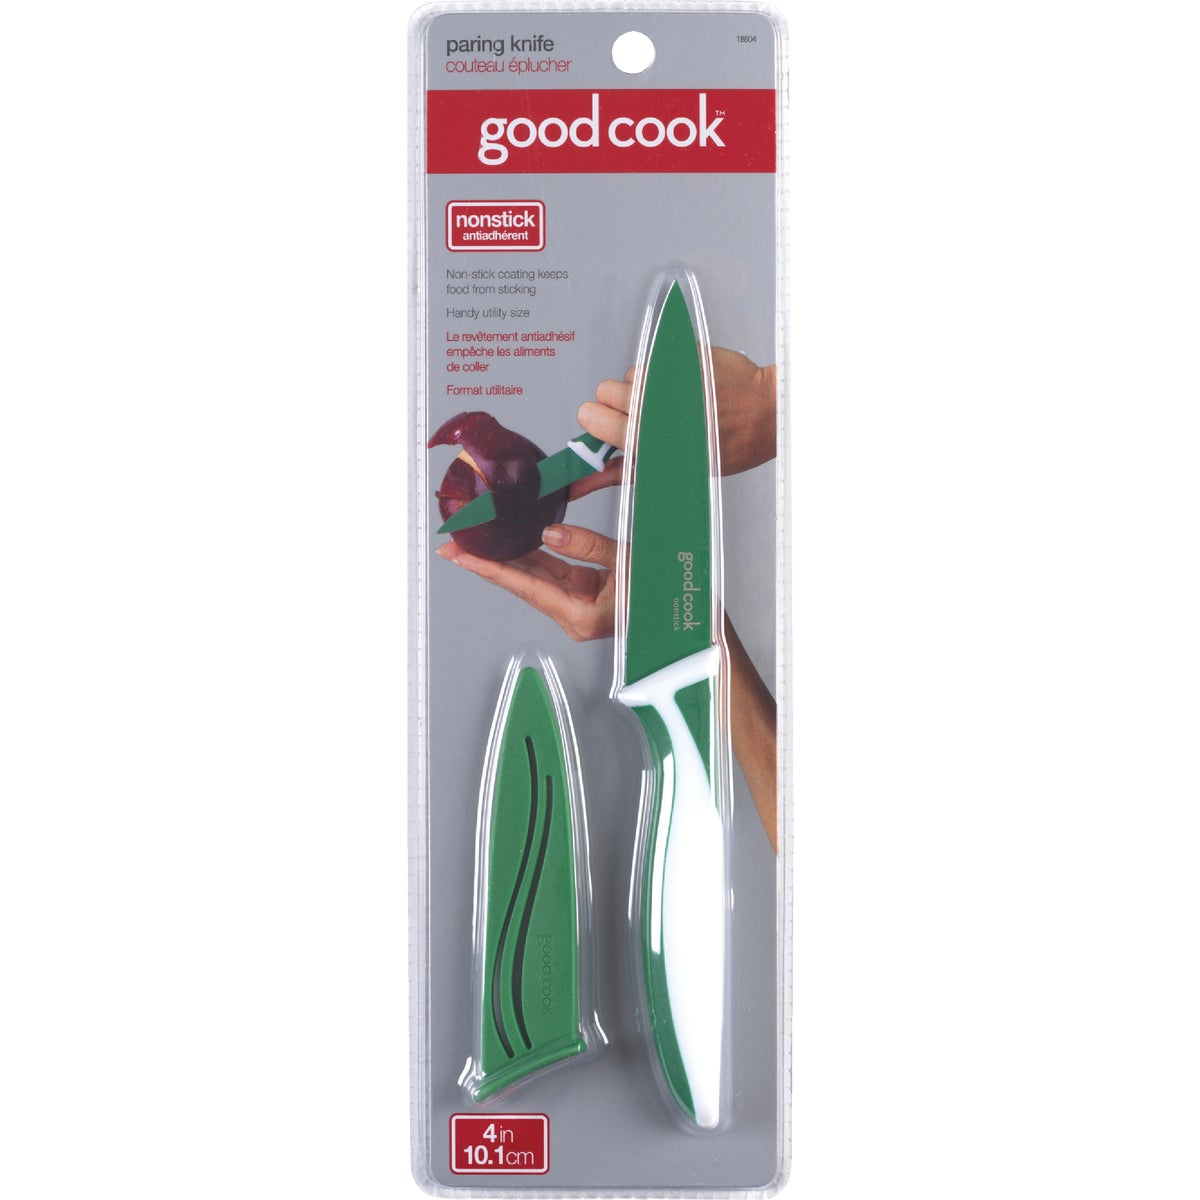 Goodcook 4 In. Paring Knife with Cover